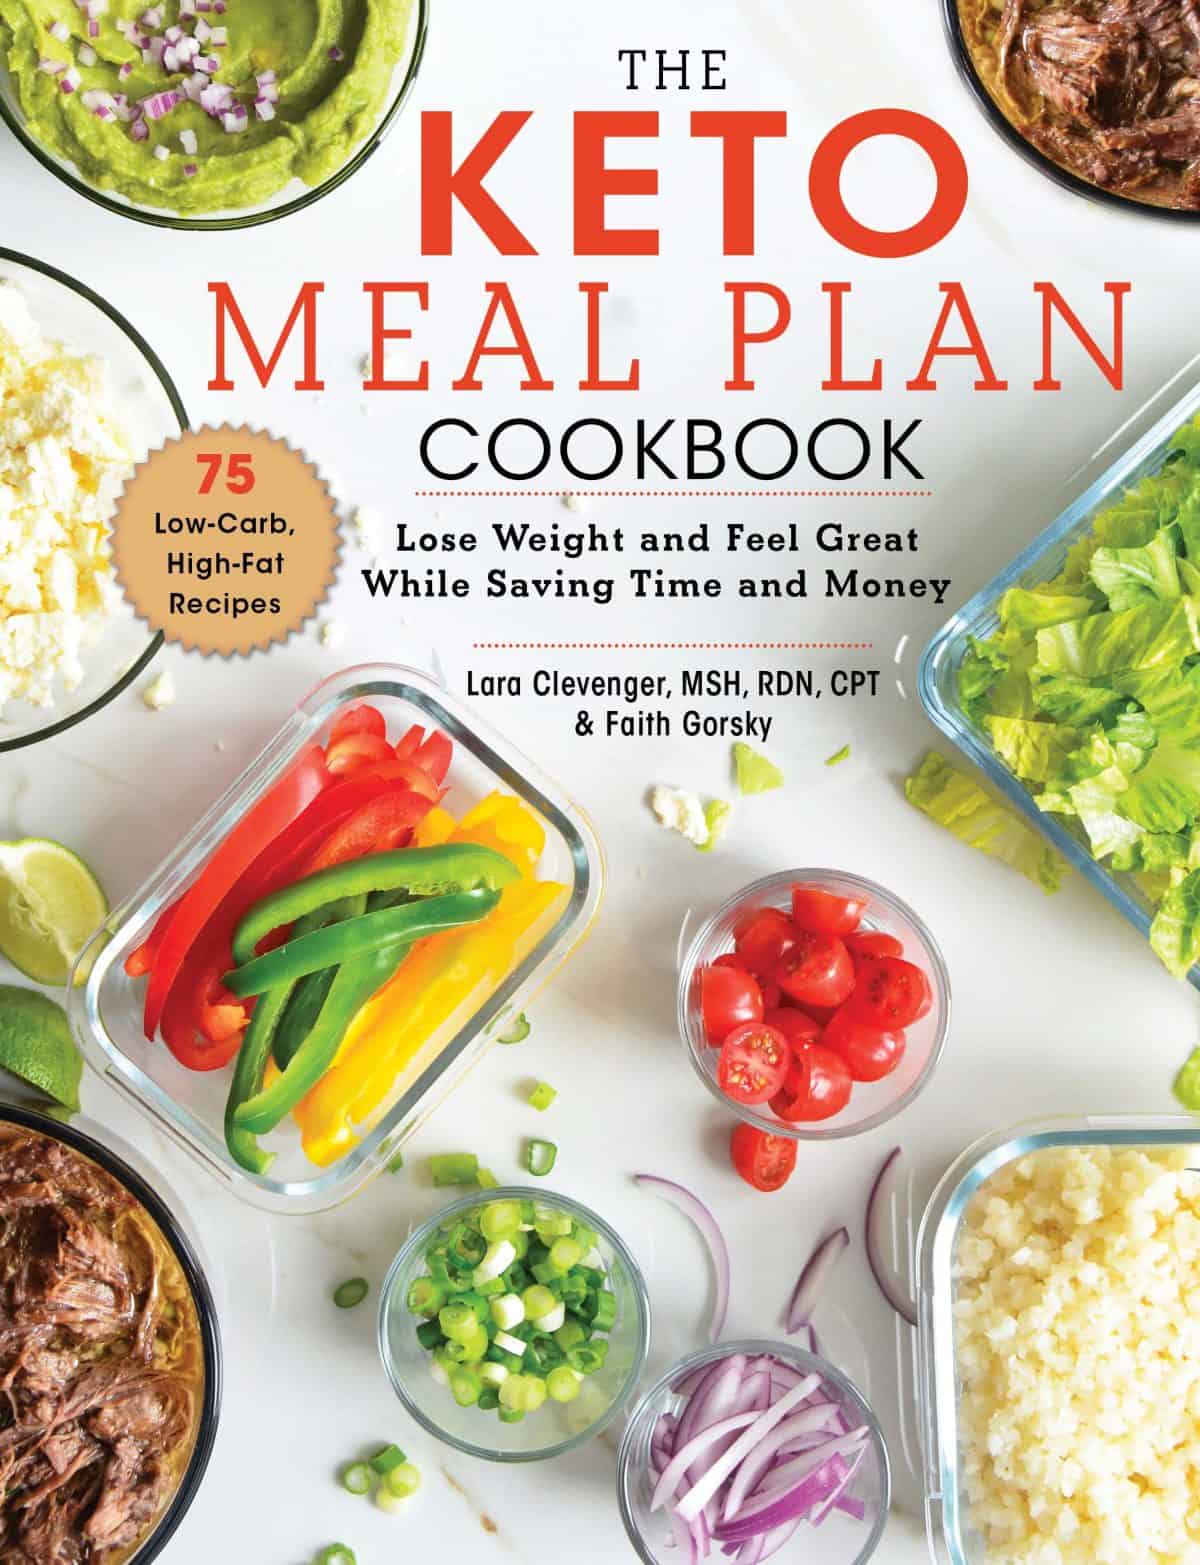 Keto Meal Plan Cookbook Cover